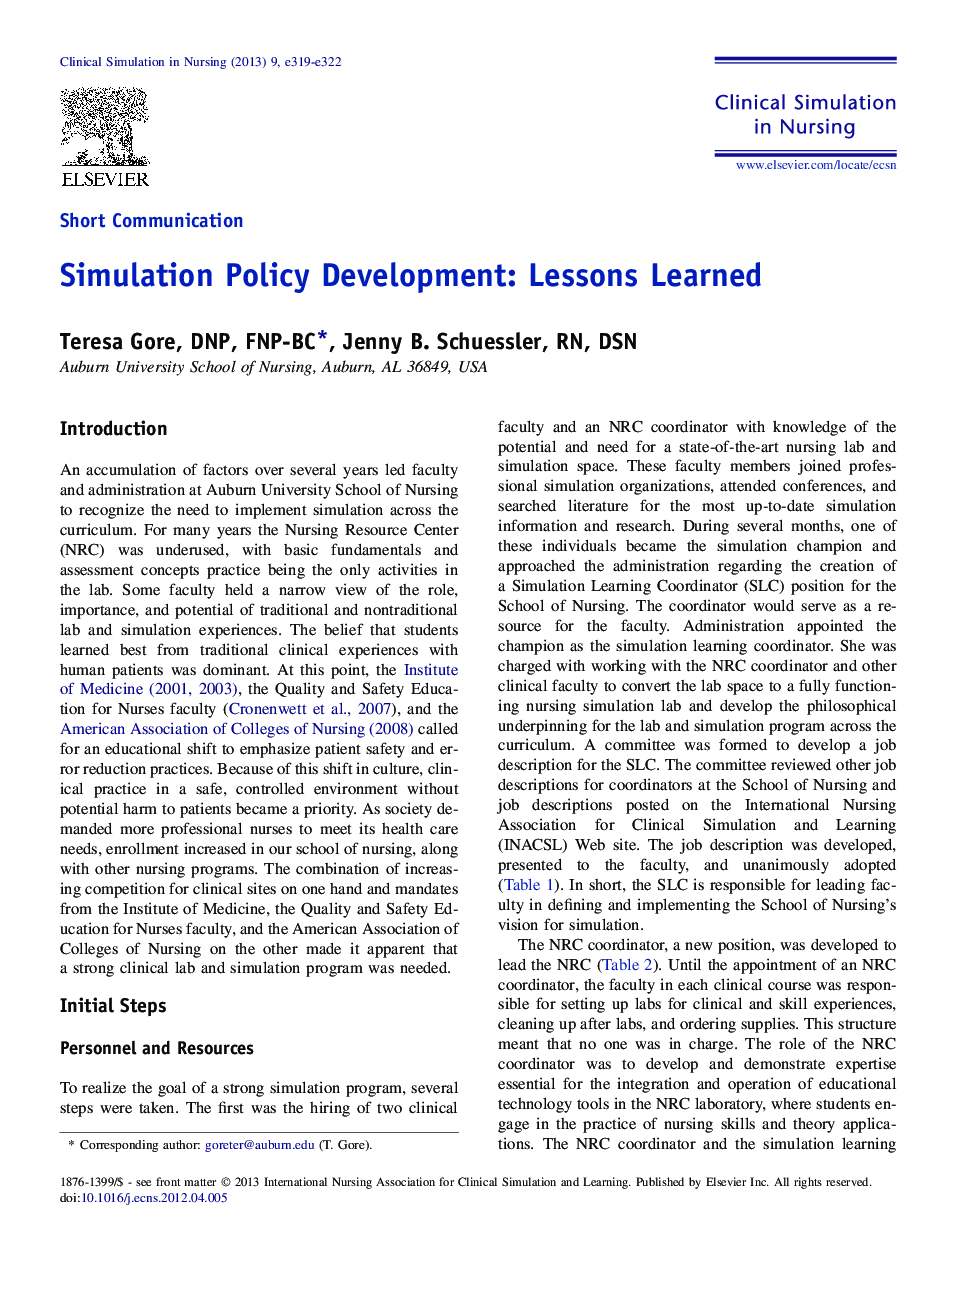 Simulation Policy Development: Lessons Learned